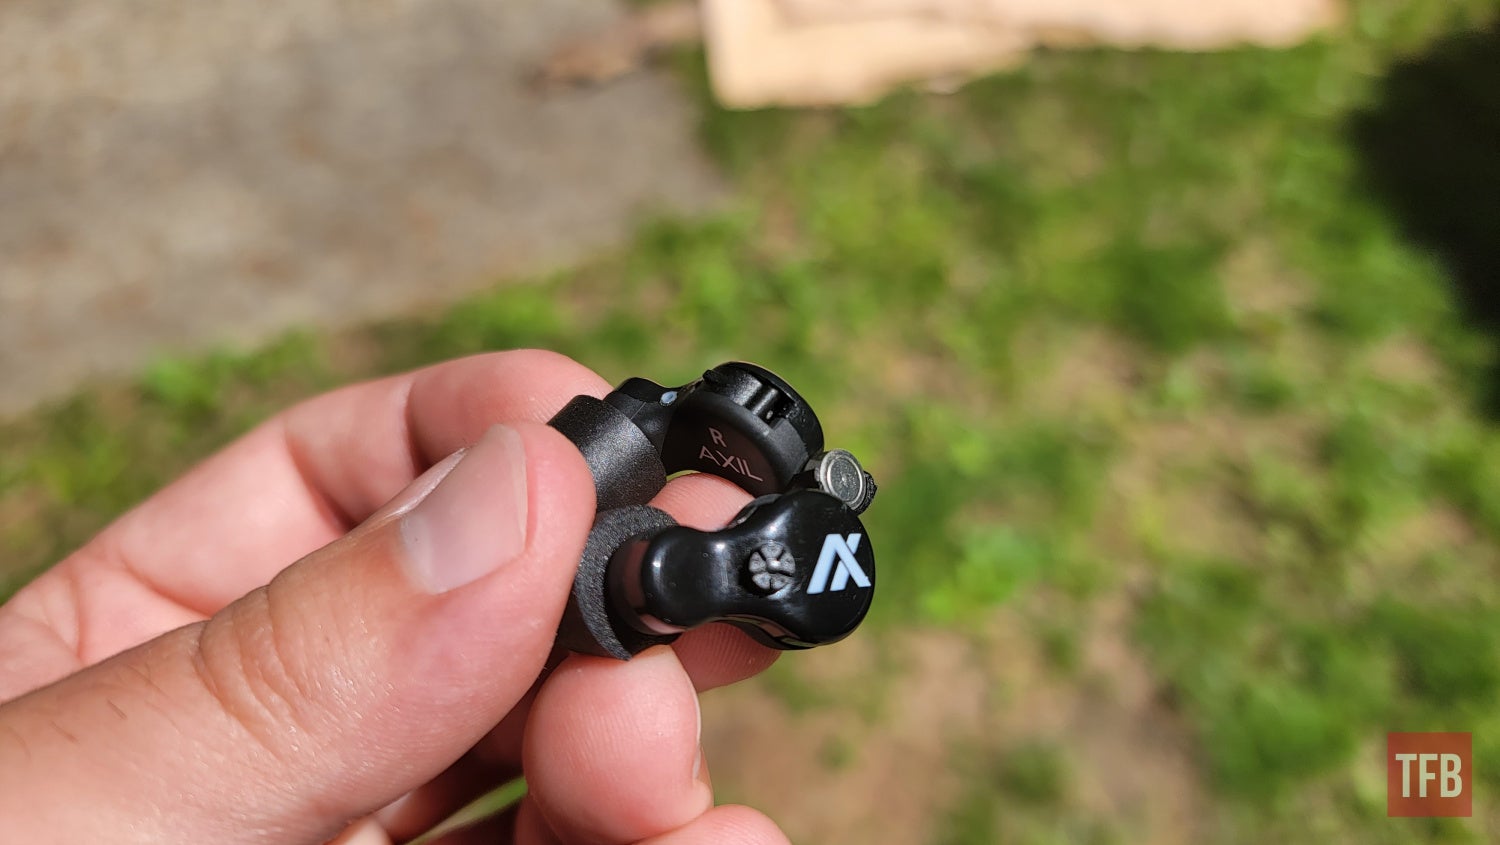 TFB Review: The Lightweight and Low-Profile AXIL GS Digital 1 Earplugs